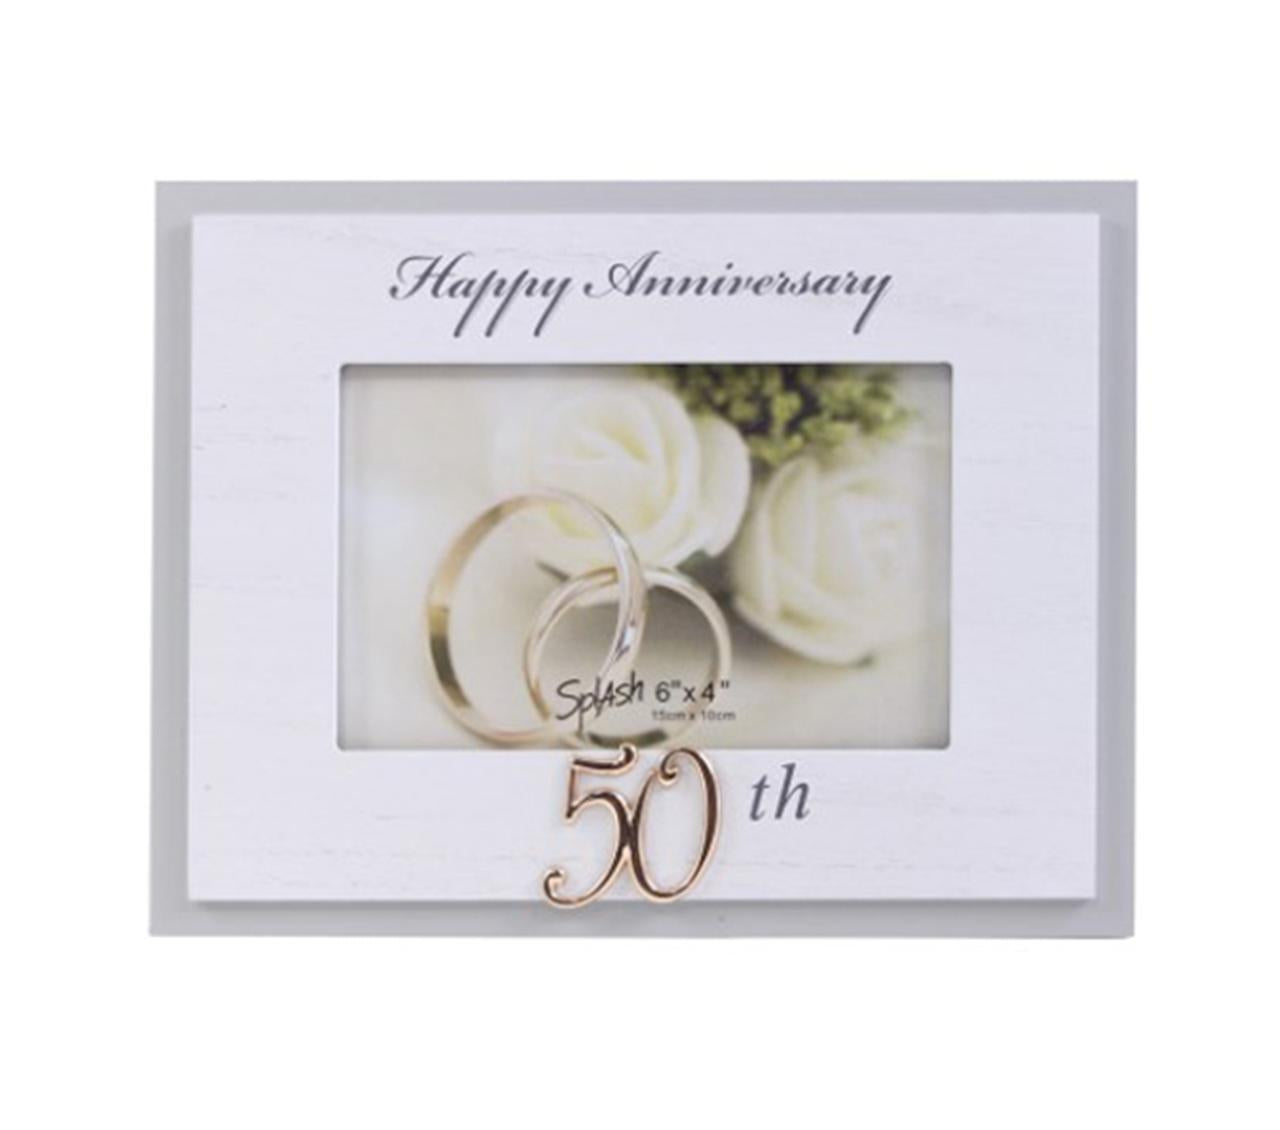 Happy Anniversary 50th Picture Frame